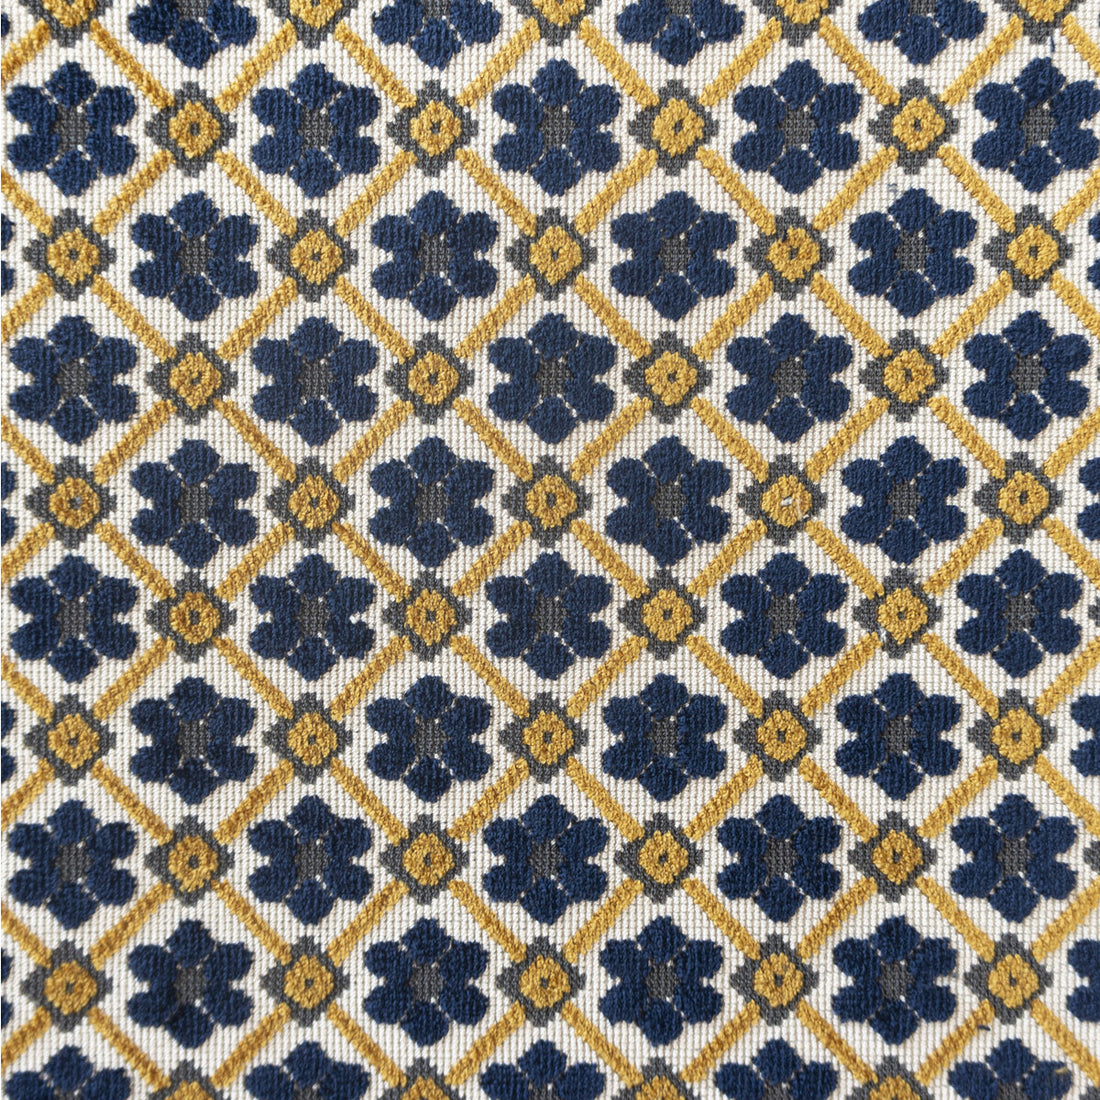 Fruela fabric in navy/ocre color - pattern LCT1025.004.0 - by Gaston y Daniela in the Lorenzo Castillo V collection